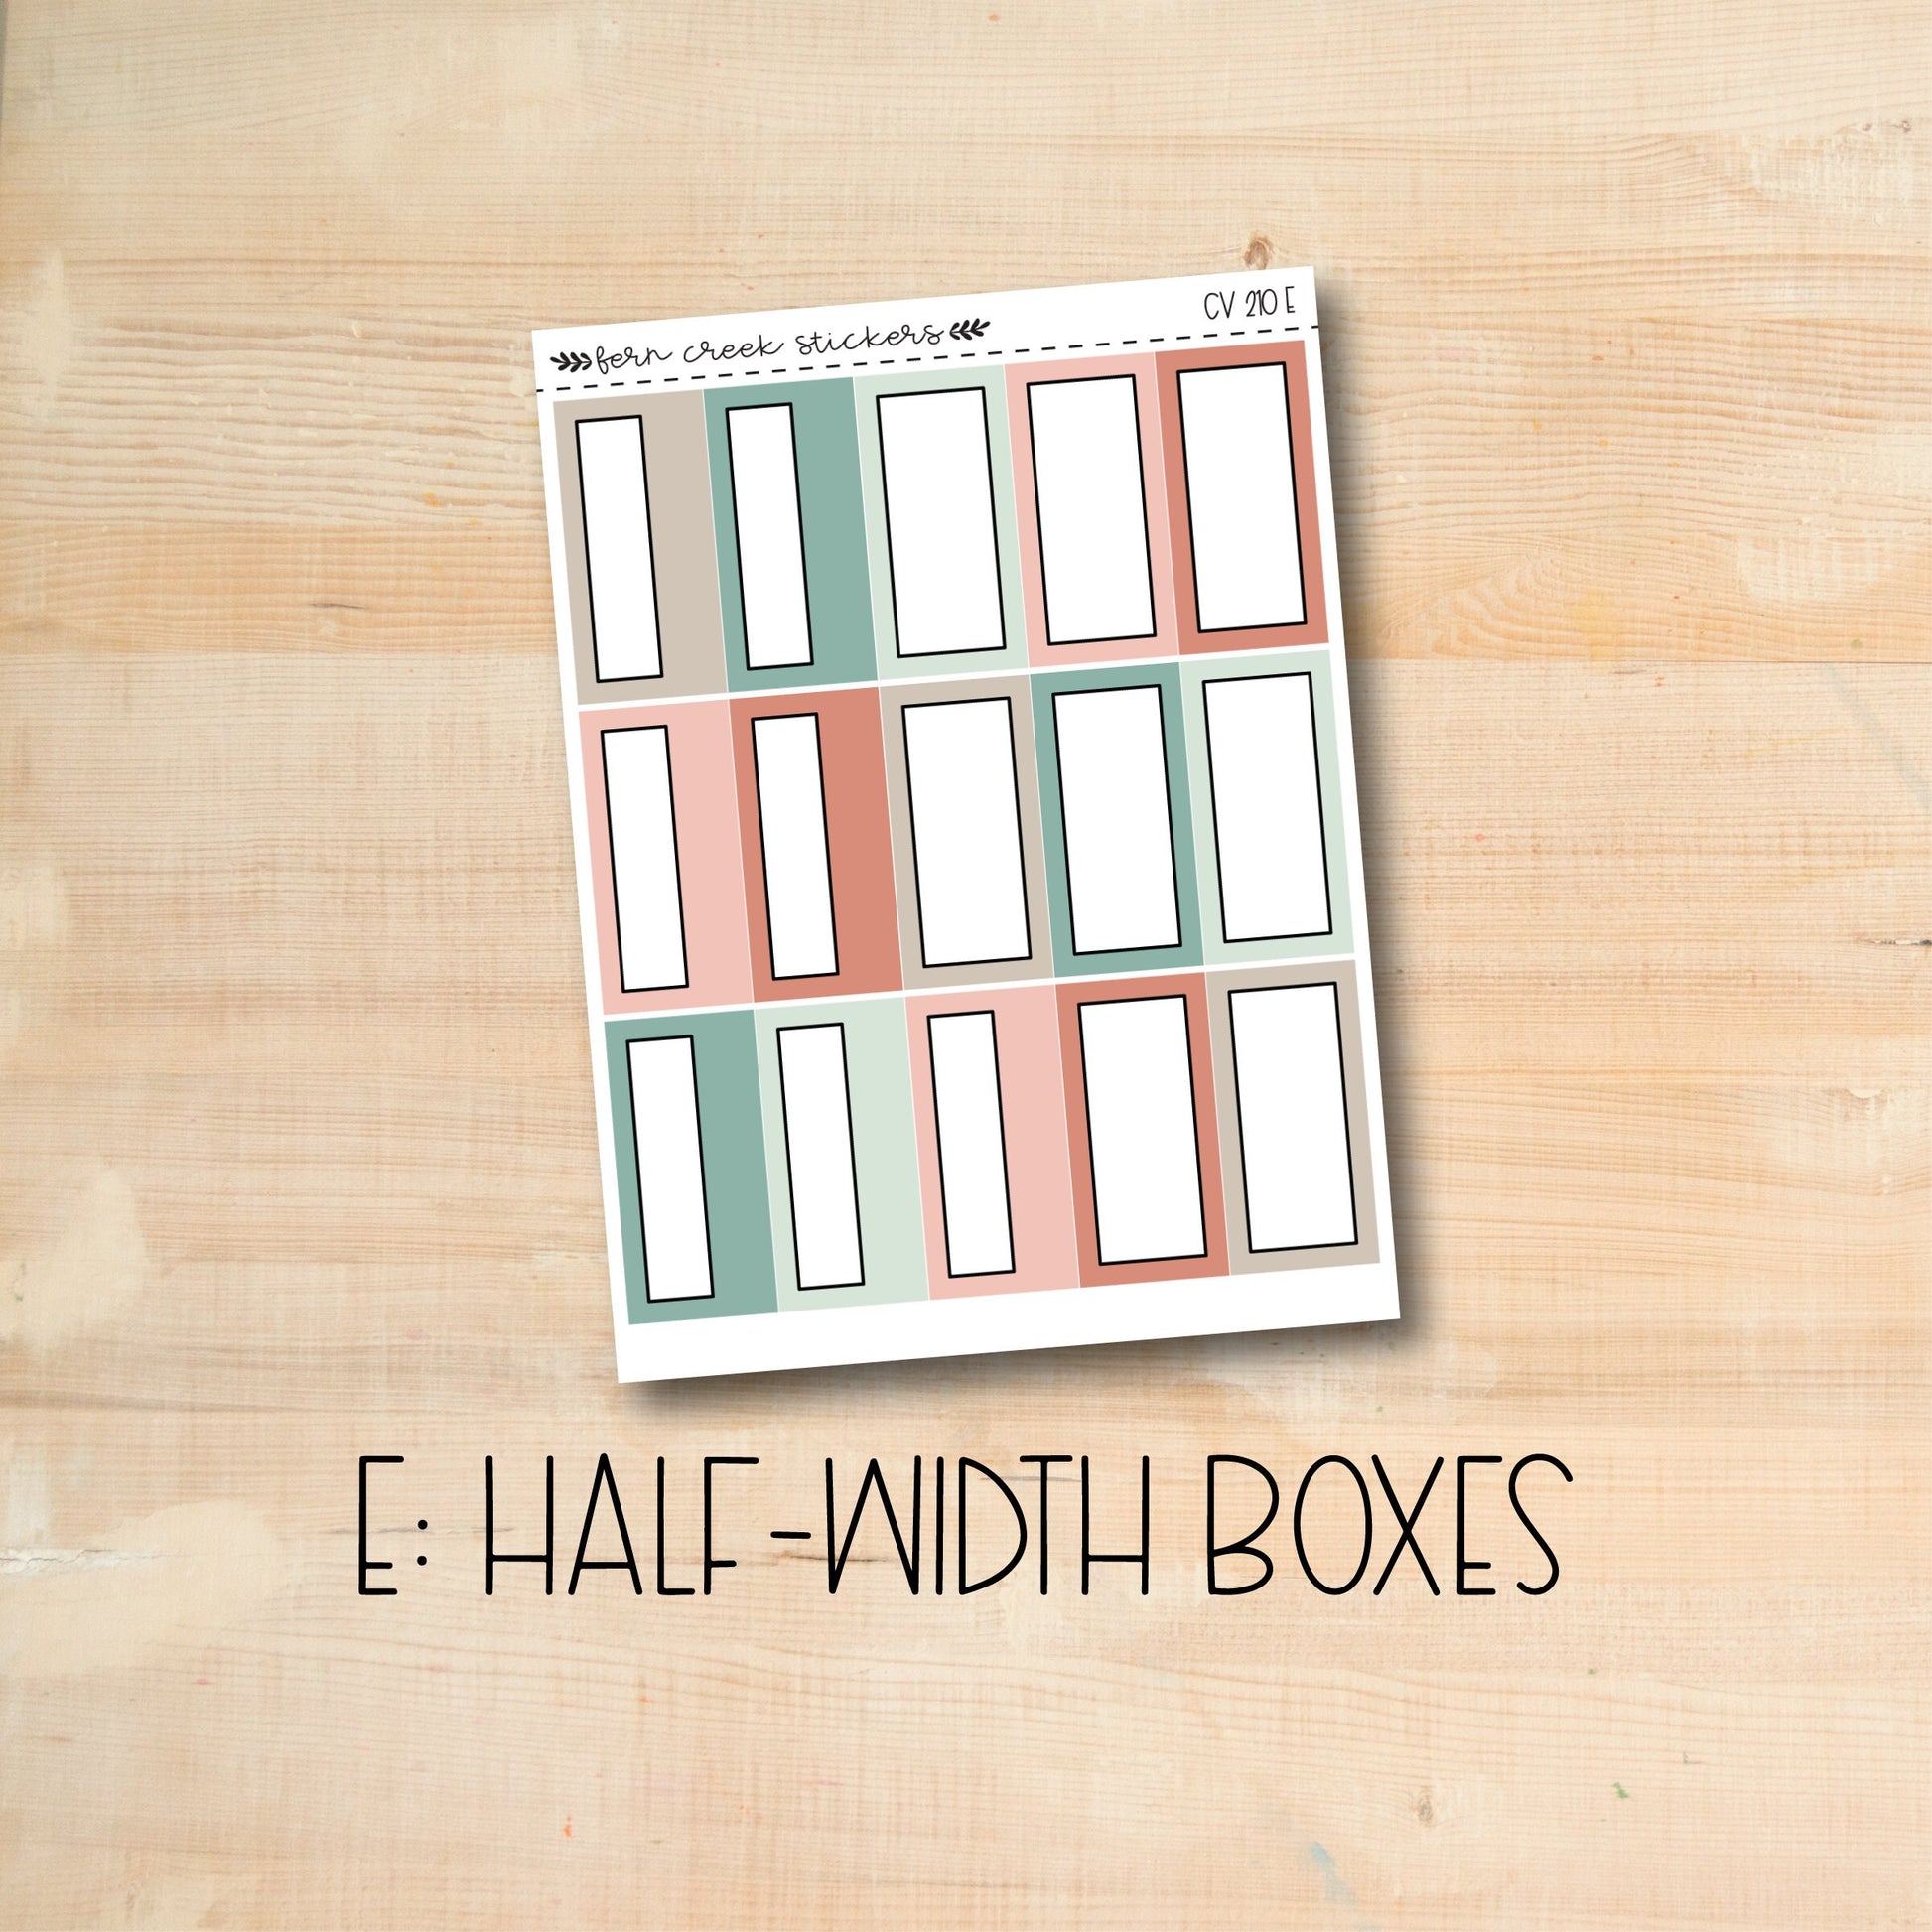 the e half - width boxes are lined up on a wooden surface